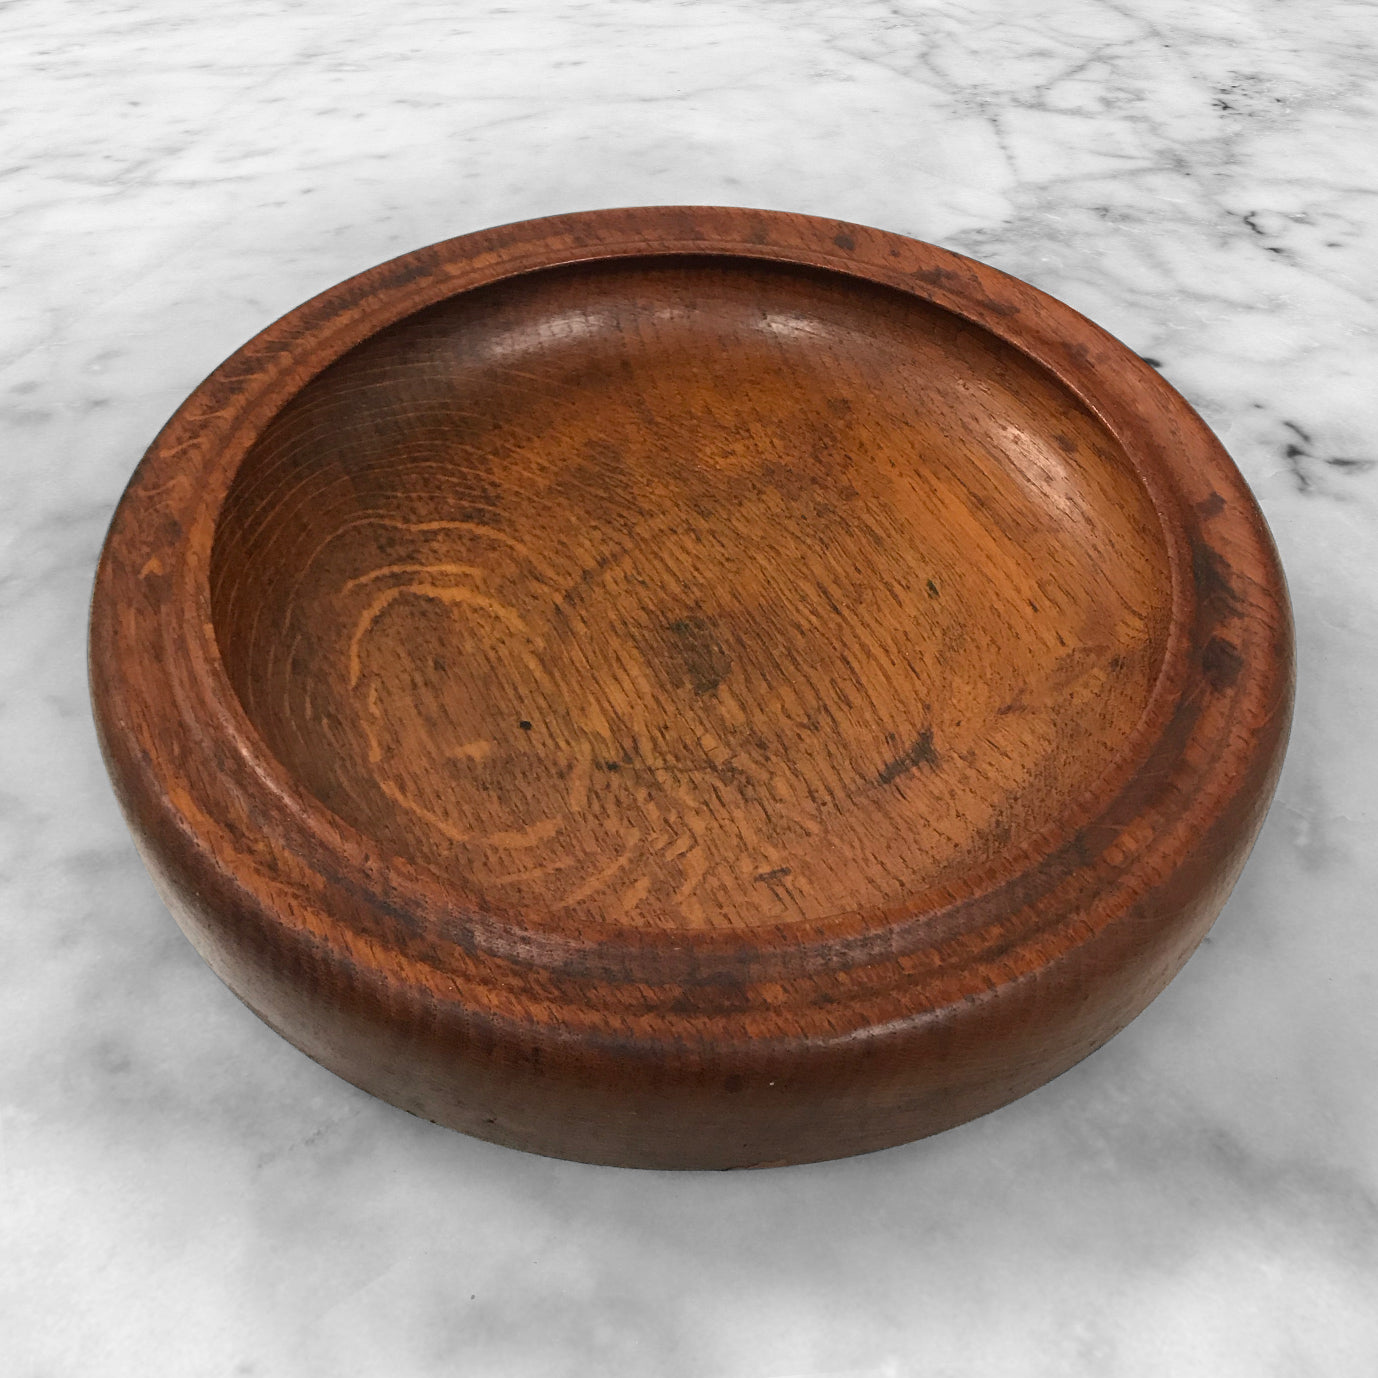 Antique Oak Table Bowl. Great size and shape with a beautiful warm colour. The profile of the bowl gives the bowl an age from around the 1930's - SHOP NOW - www.intovintage.co.uk